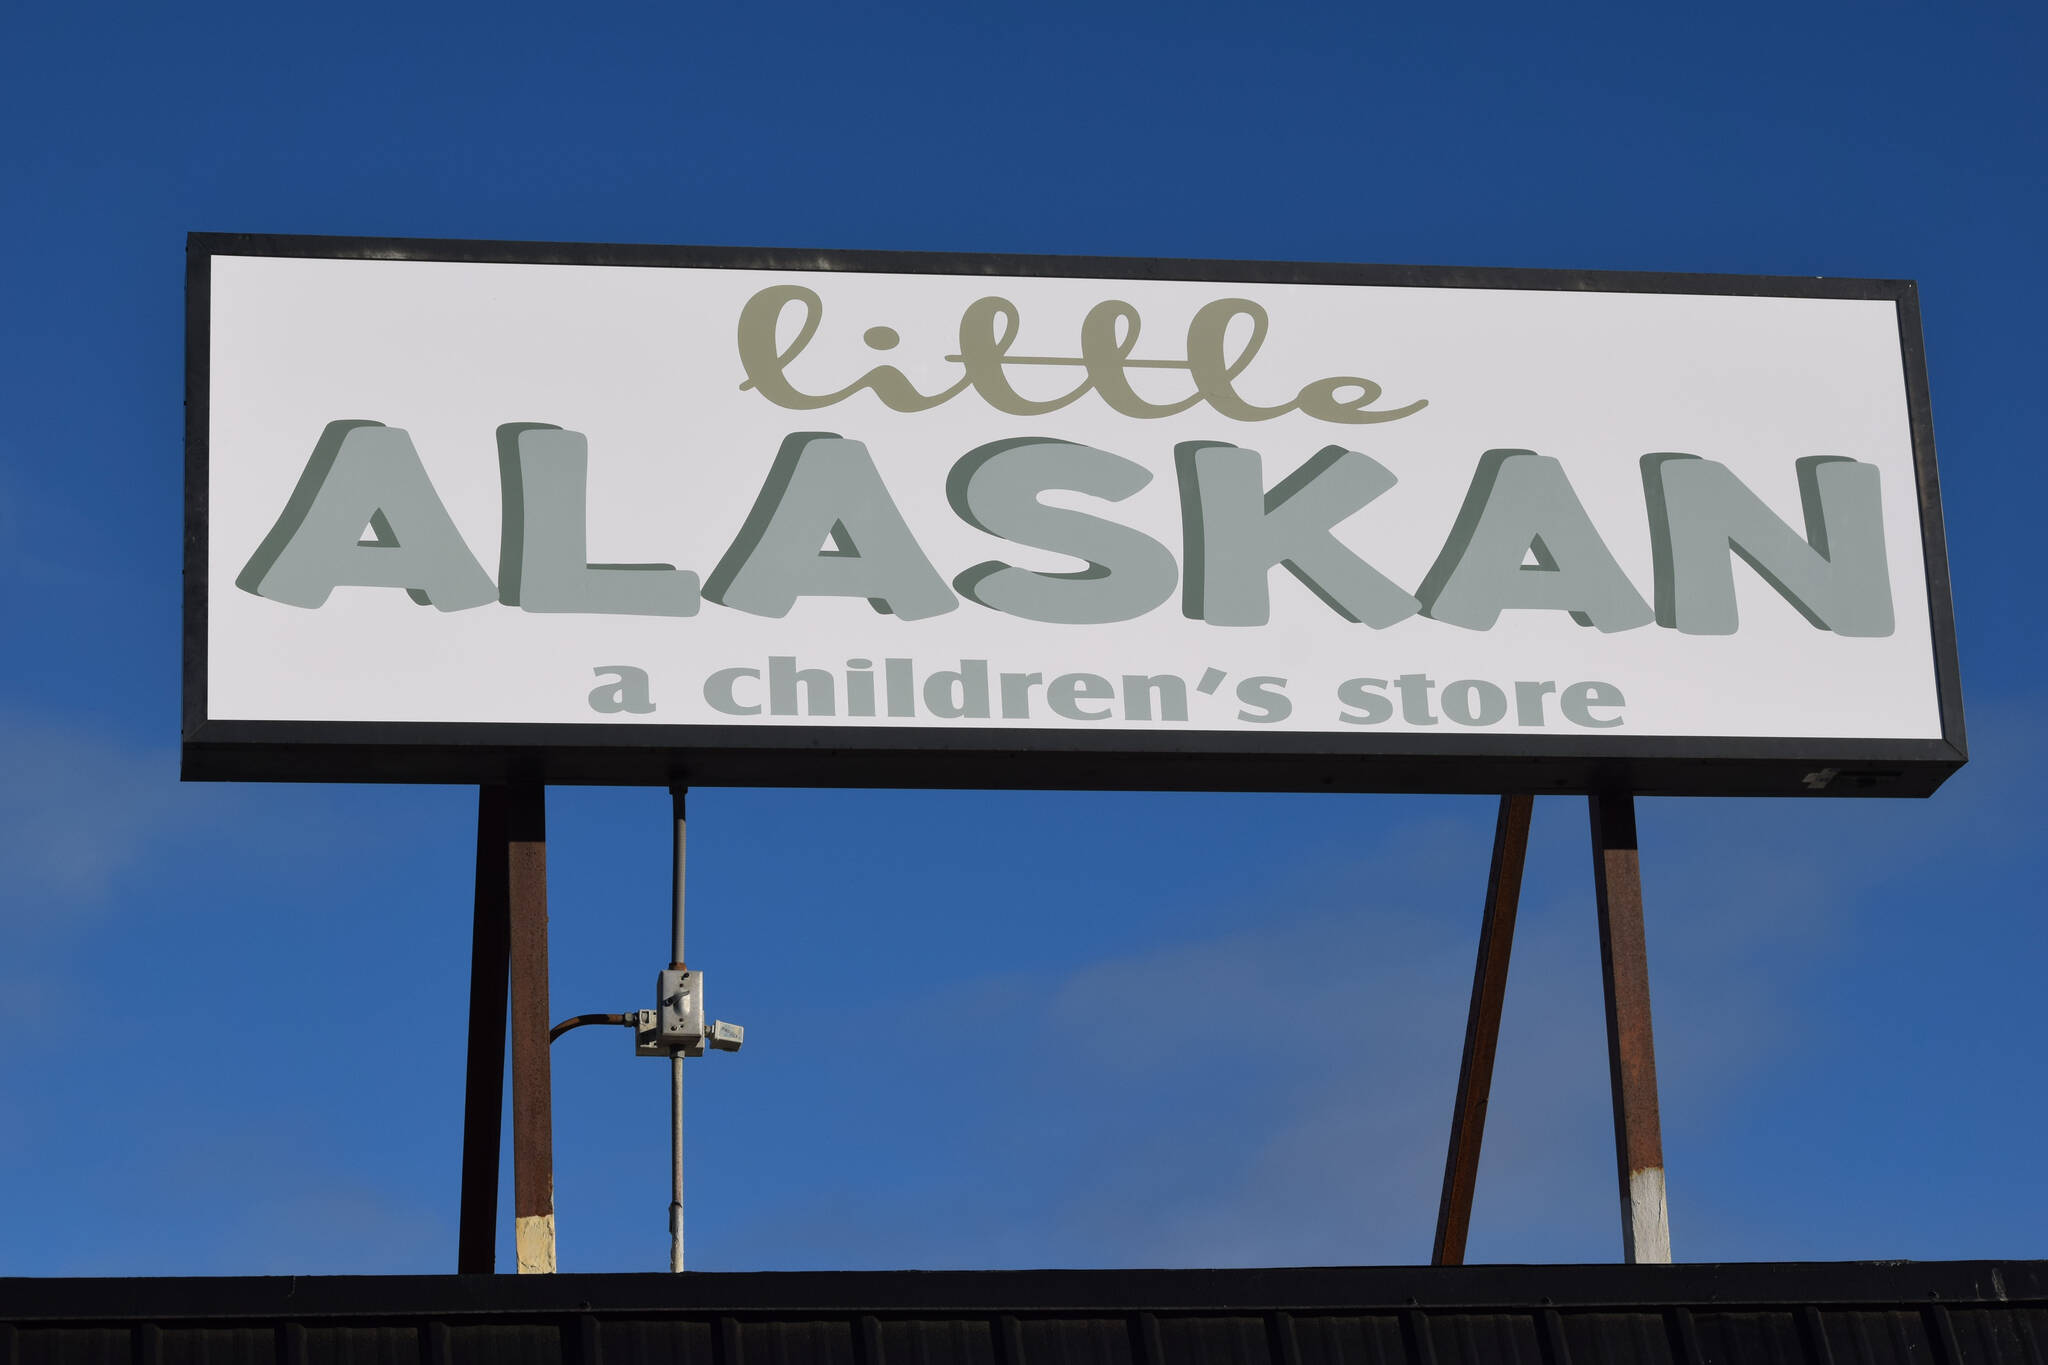 The Little Alaskan children’s store is seen in Kenai on Sunday, Oct. 24, 2021. Located where Bargain Basement used to be in Kenai, the shop opened this weekend. (Camille Botello/Peninsula Clarion)